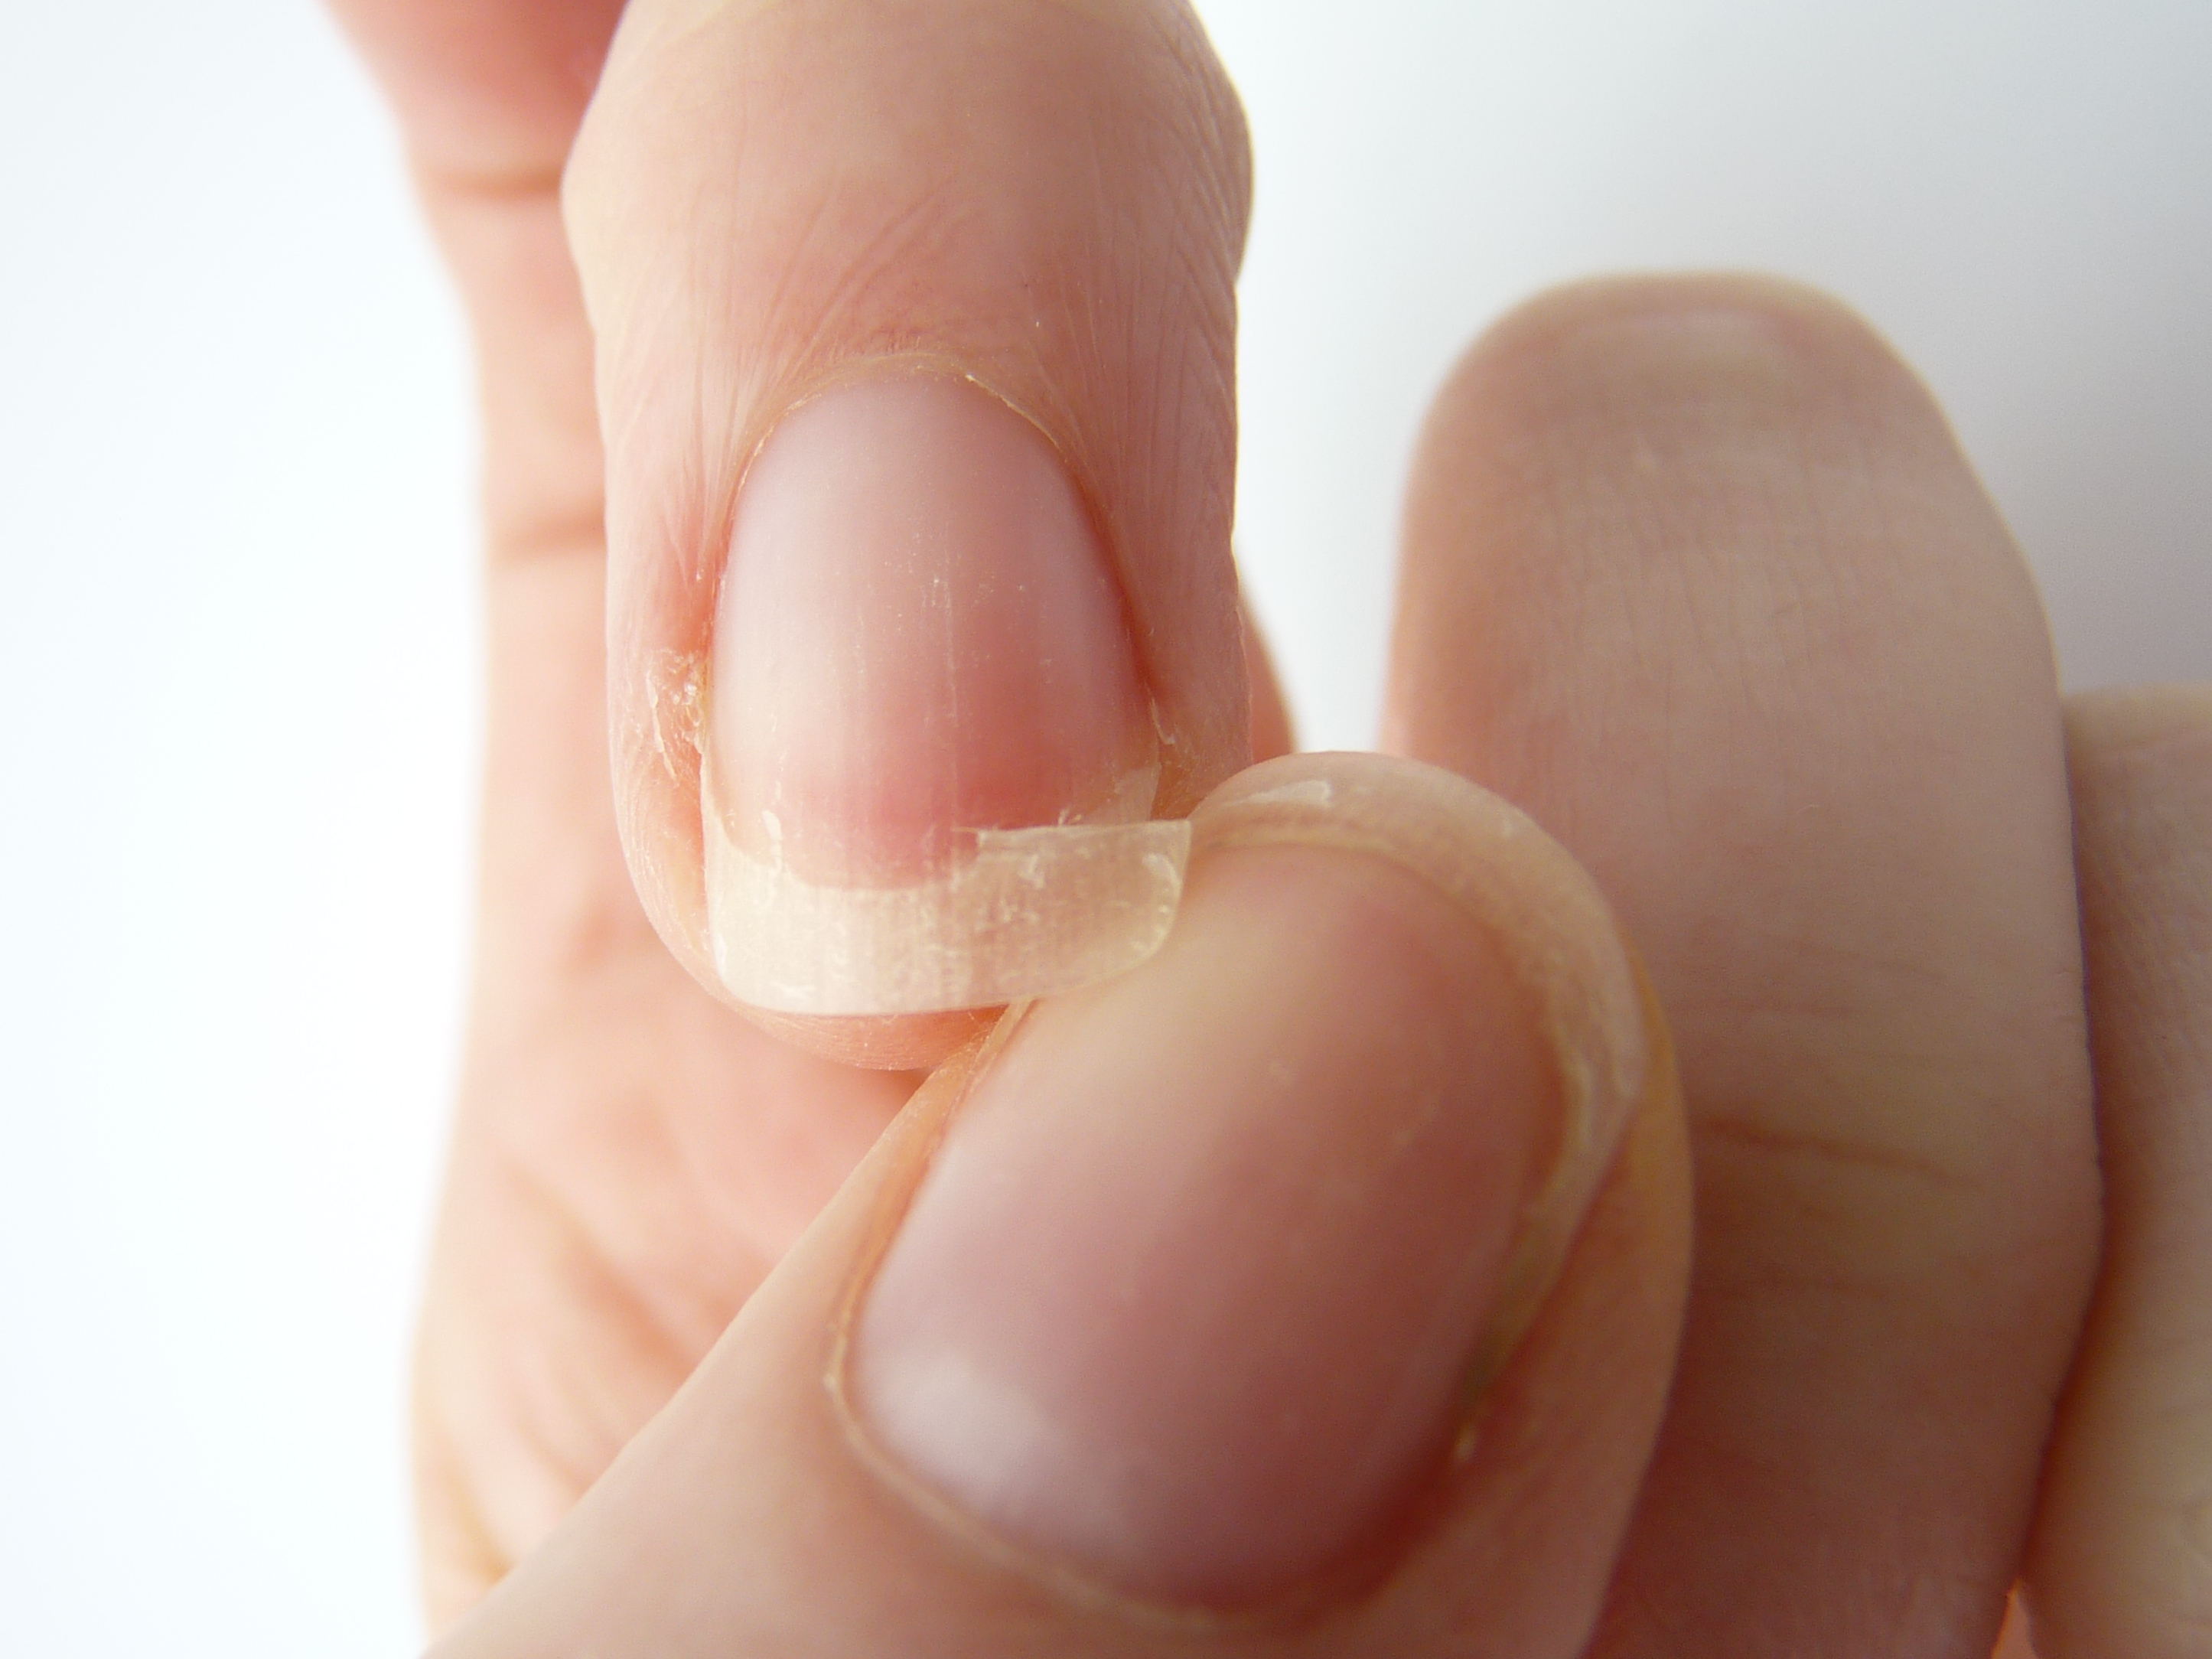 nail problems and what they mean fingernail problem pictures and descriptions big toe nail problem